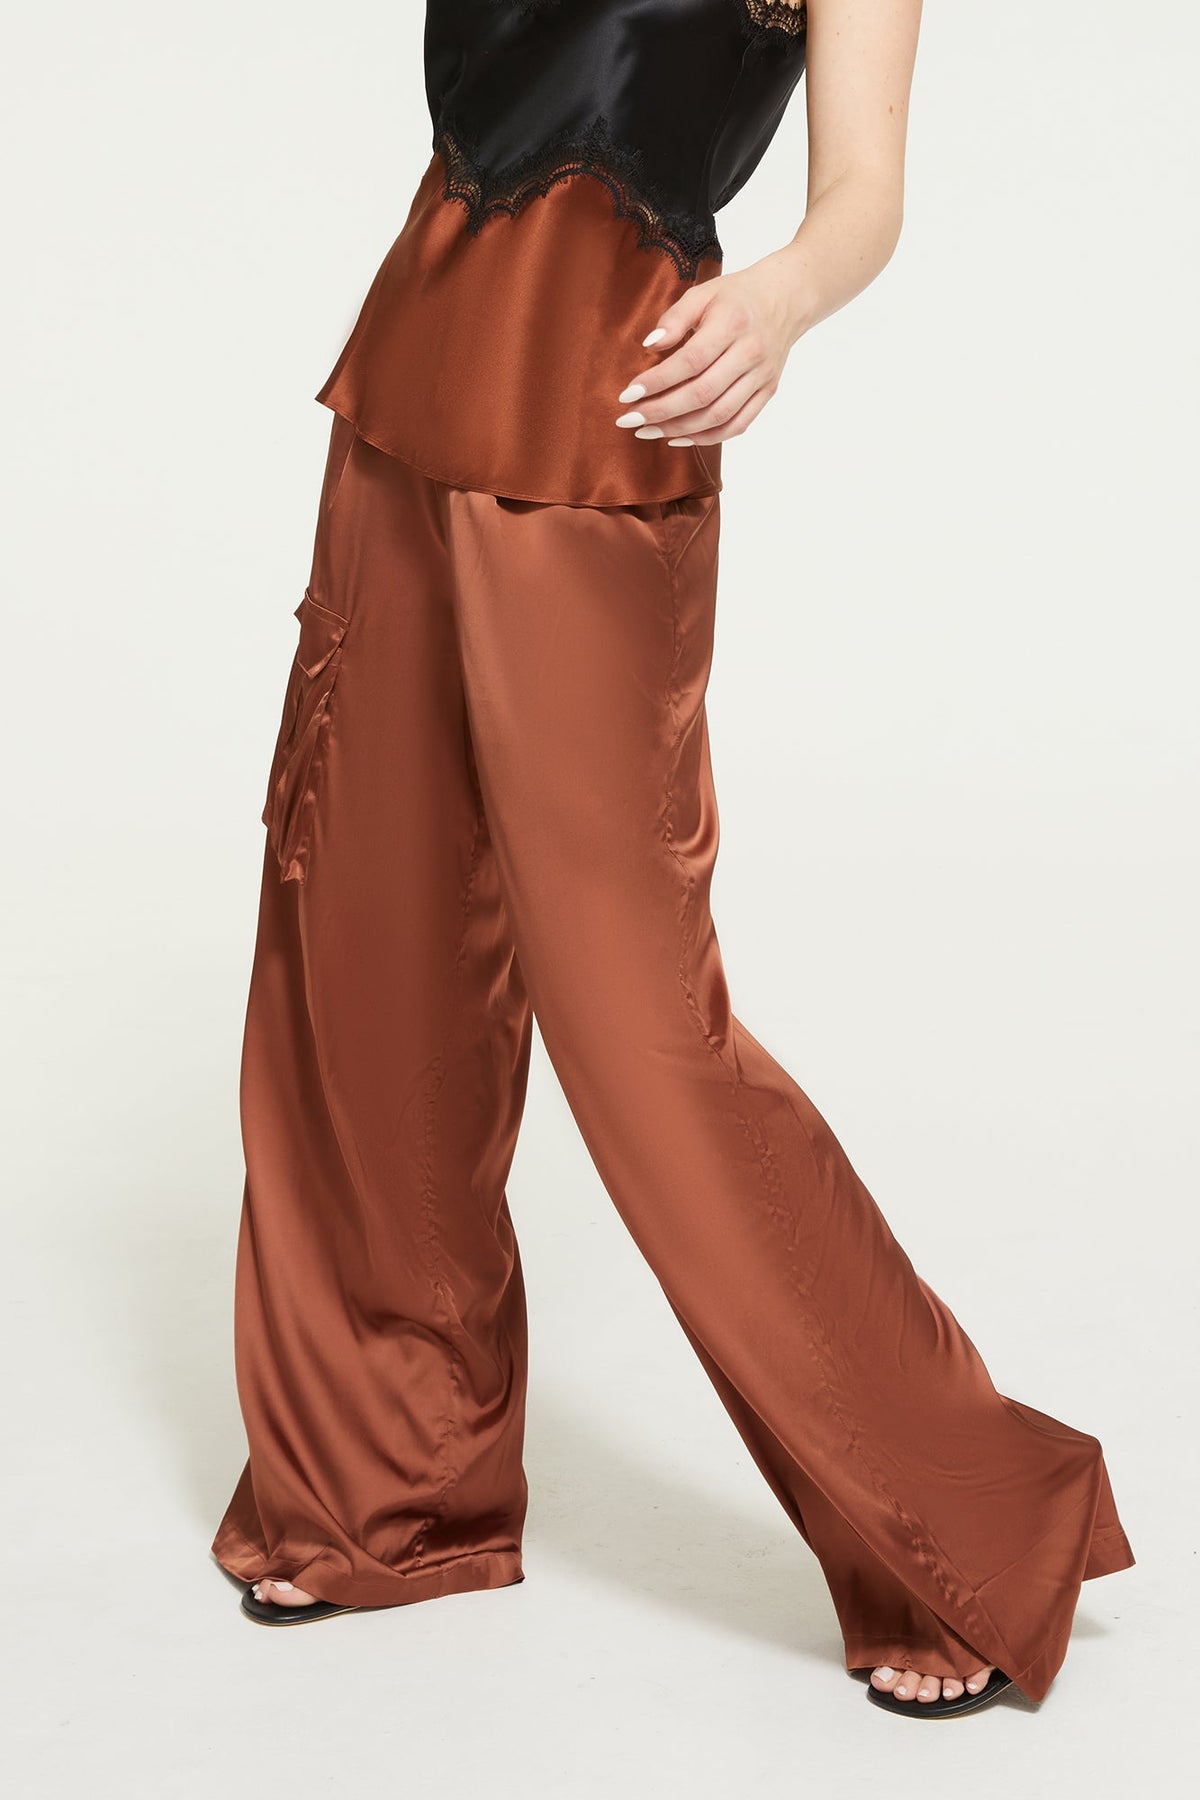 The Iris Pant in Gingerbread by Ginia RTW